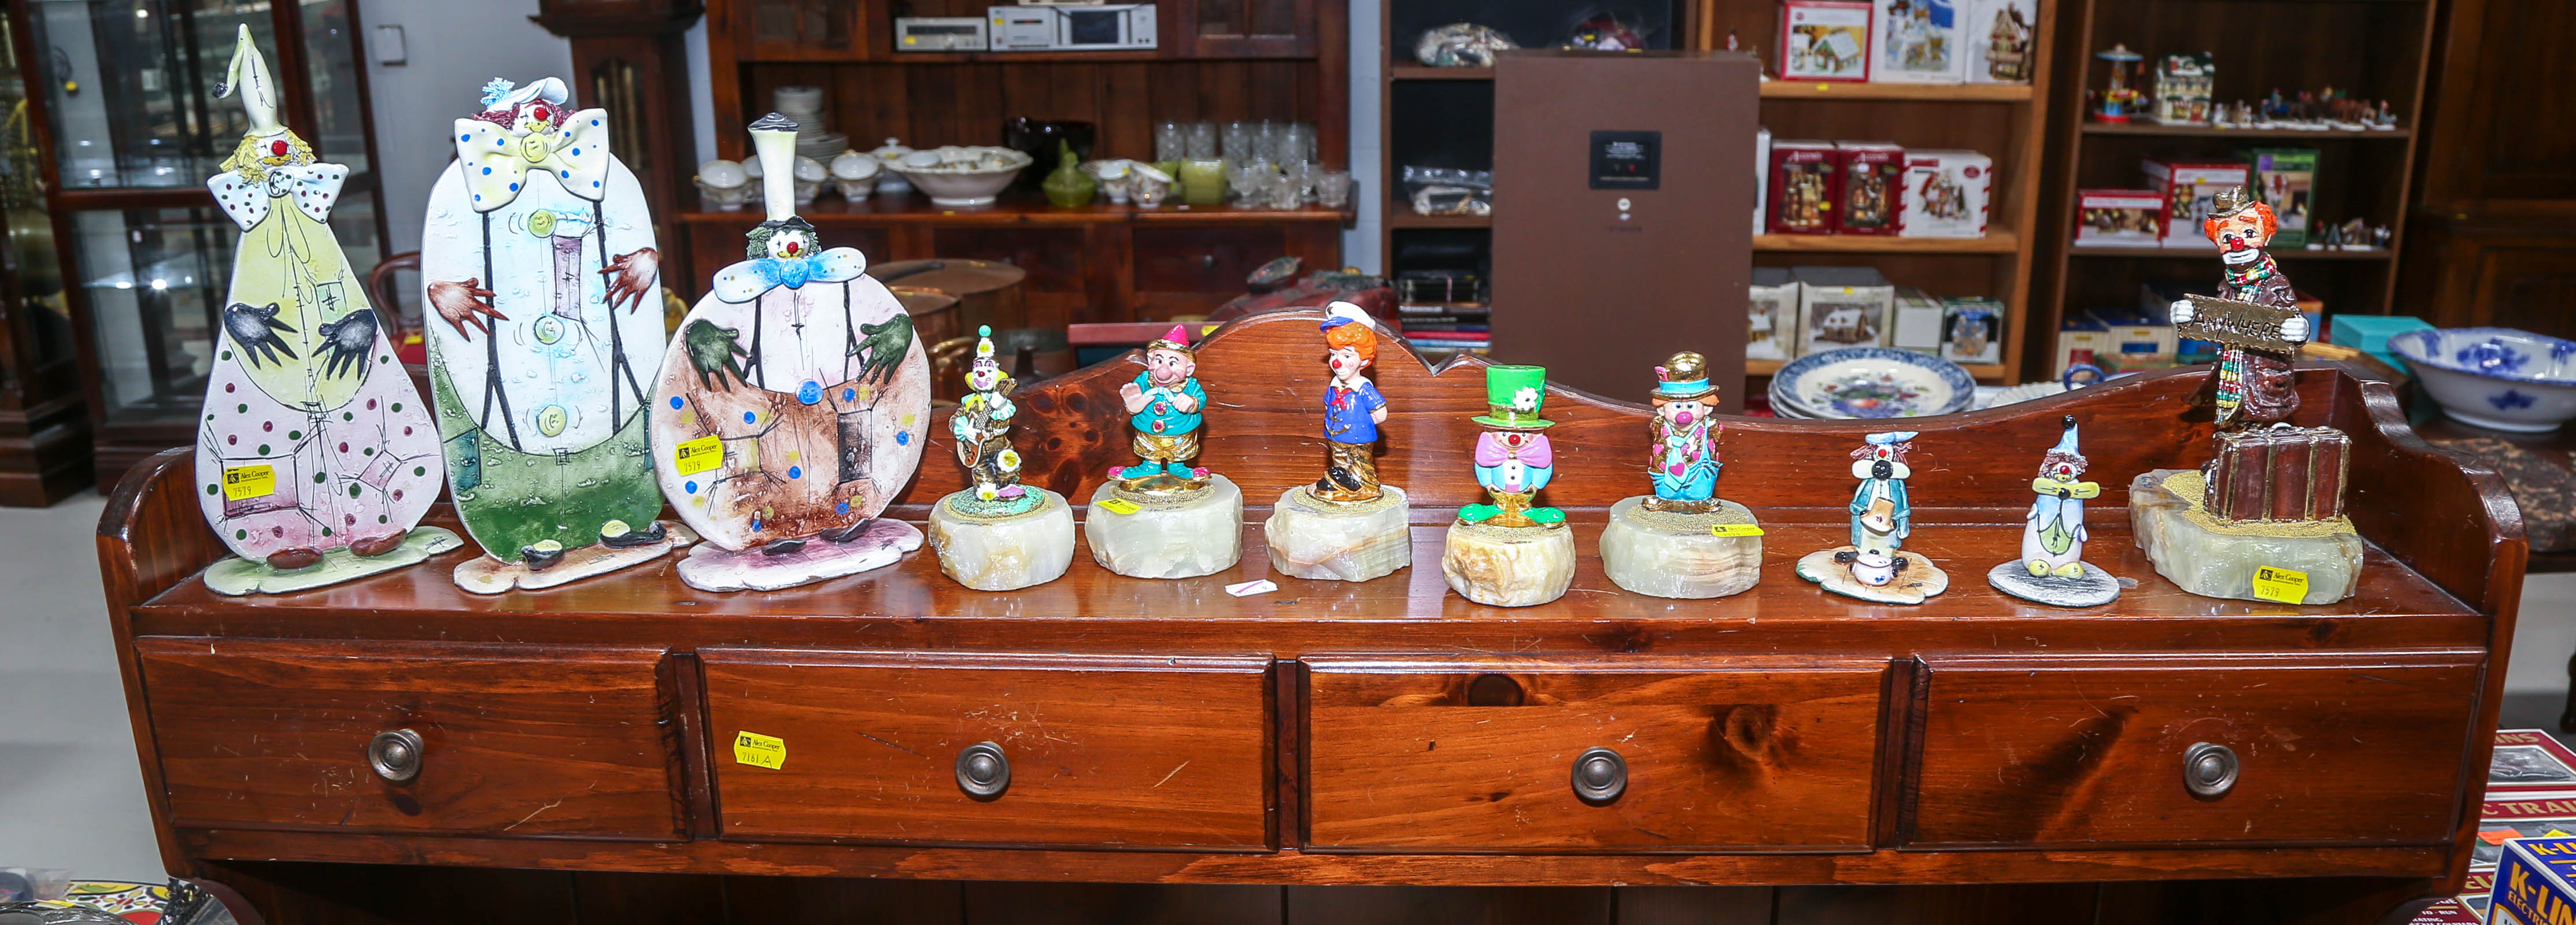 GROUP OF RON & OTHER ARTISAN CLOWNS